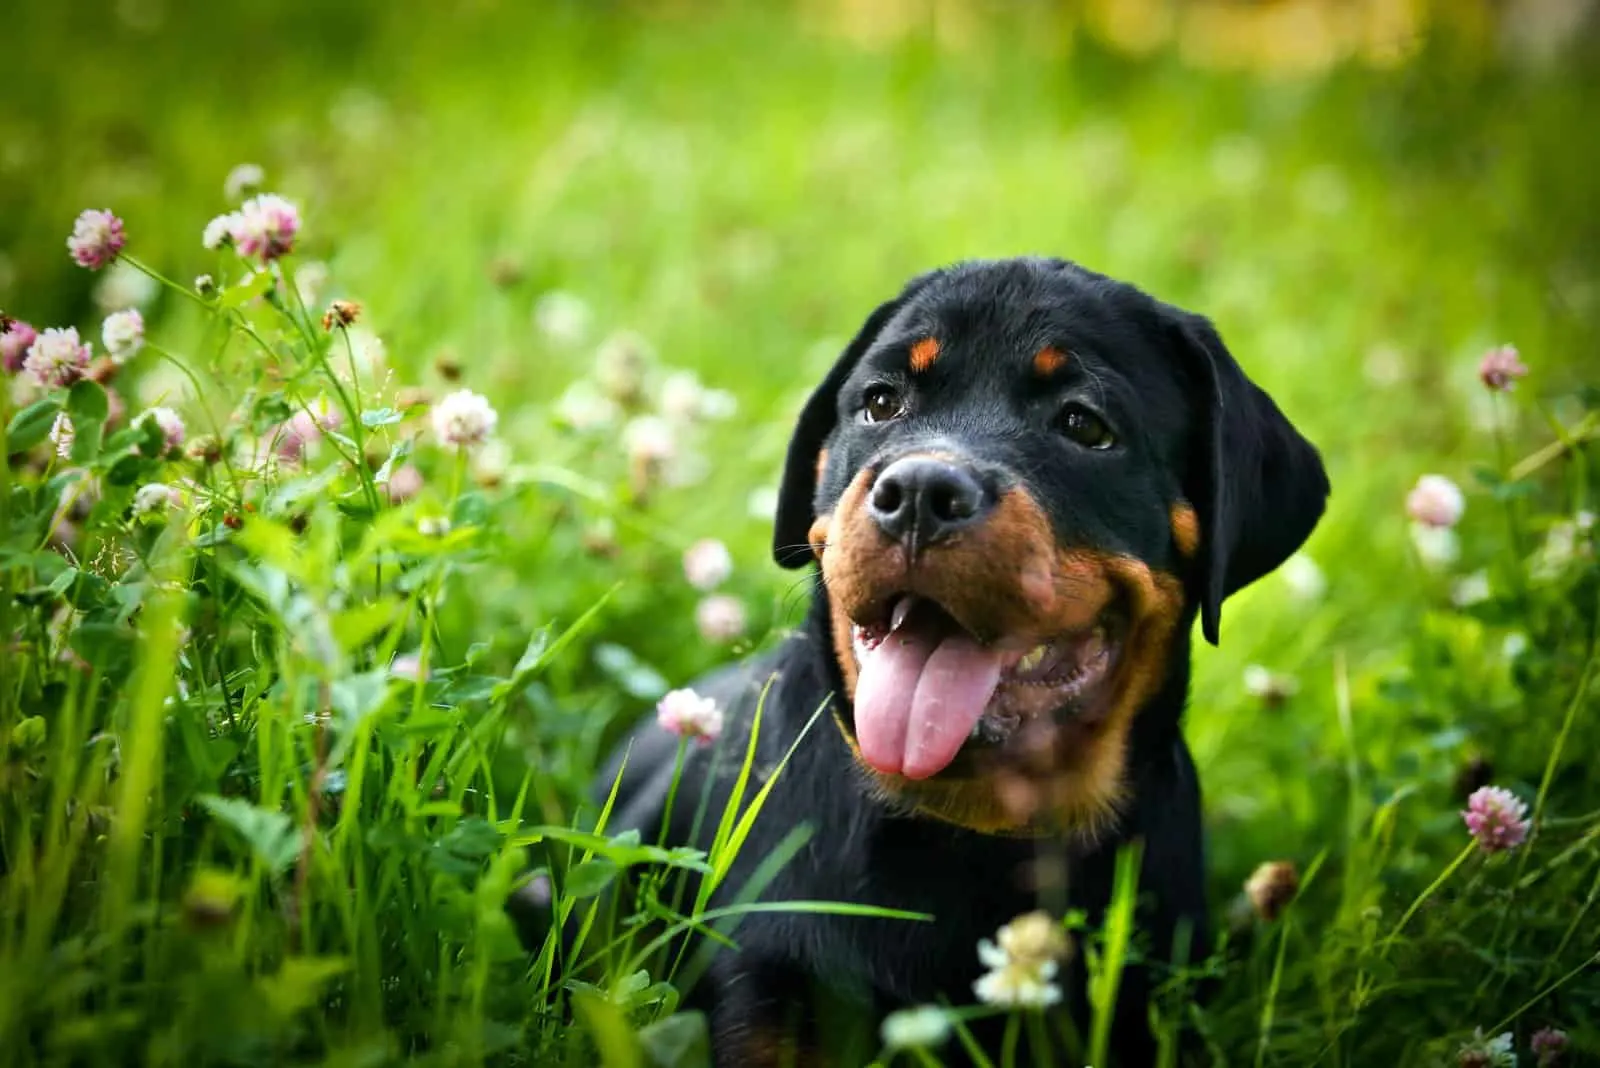 Rottweiler puppy in grass with flowers